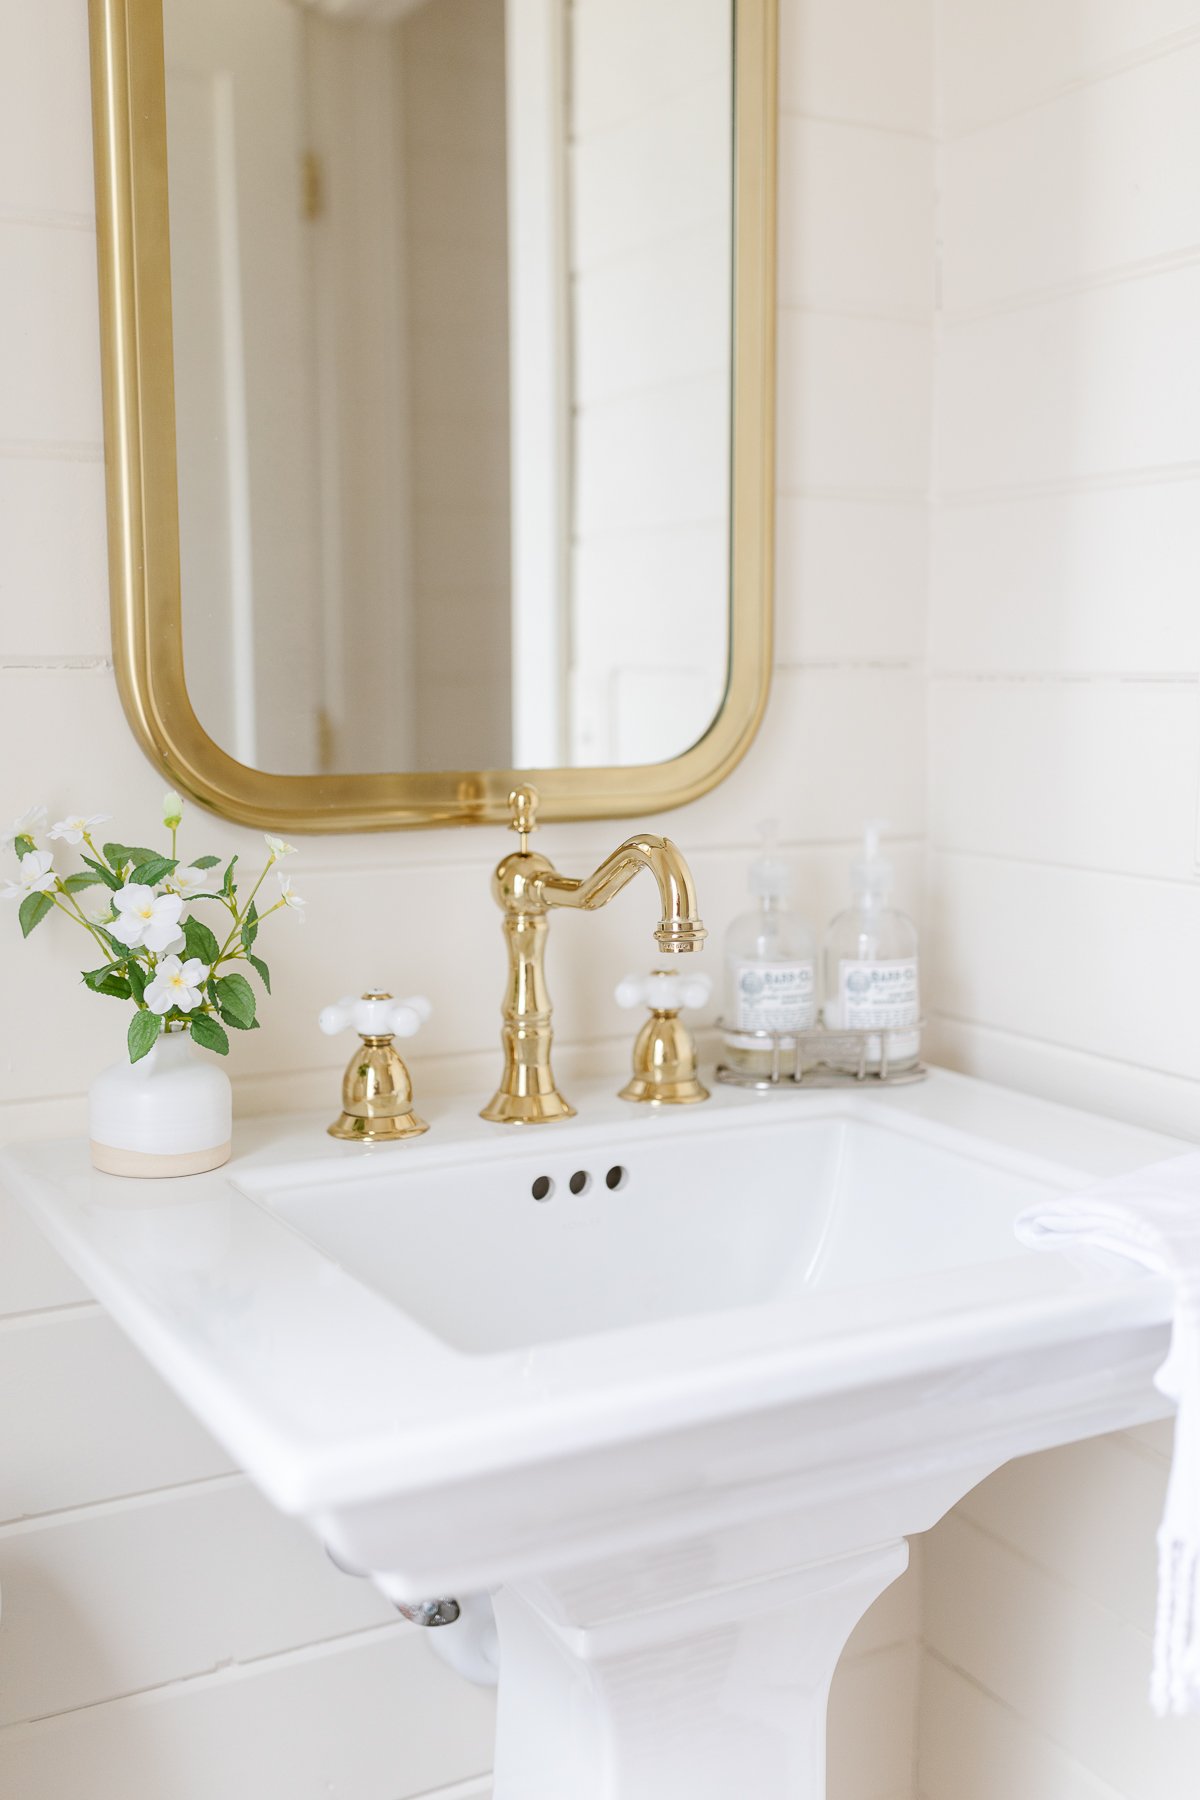 A white bathroom with a gold sink and mirror that makes the small room look bigger.